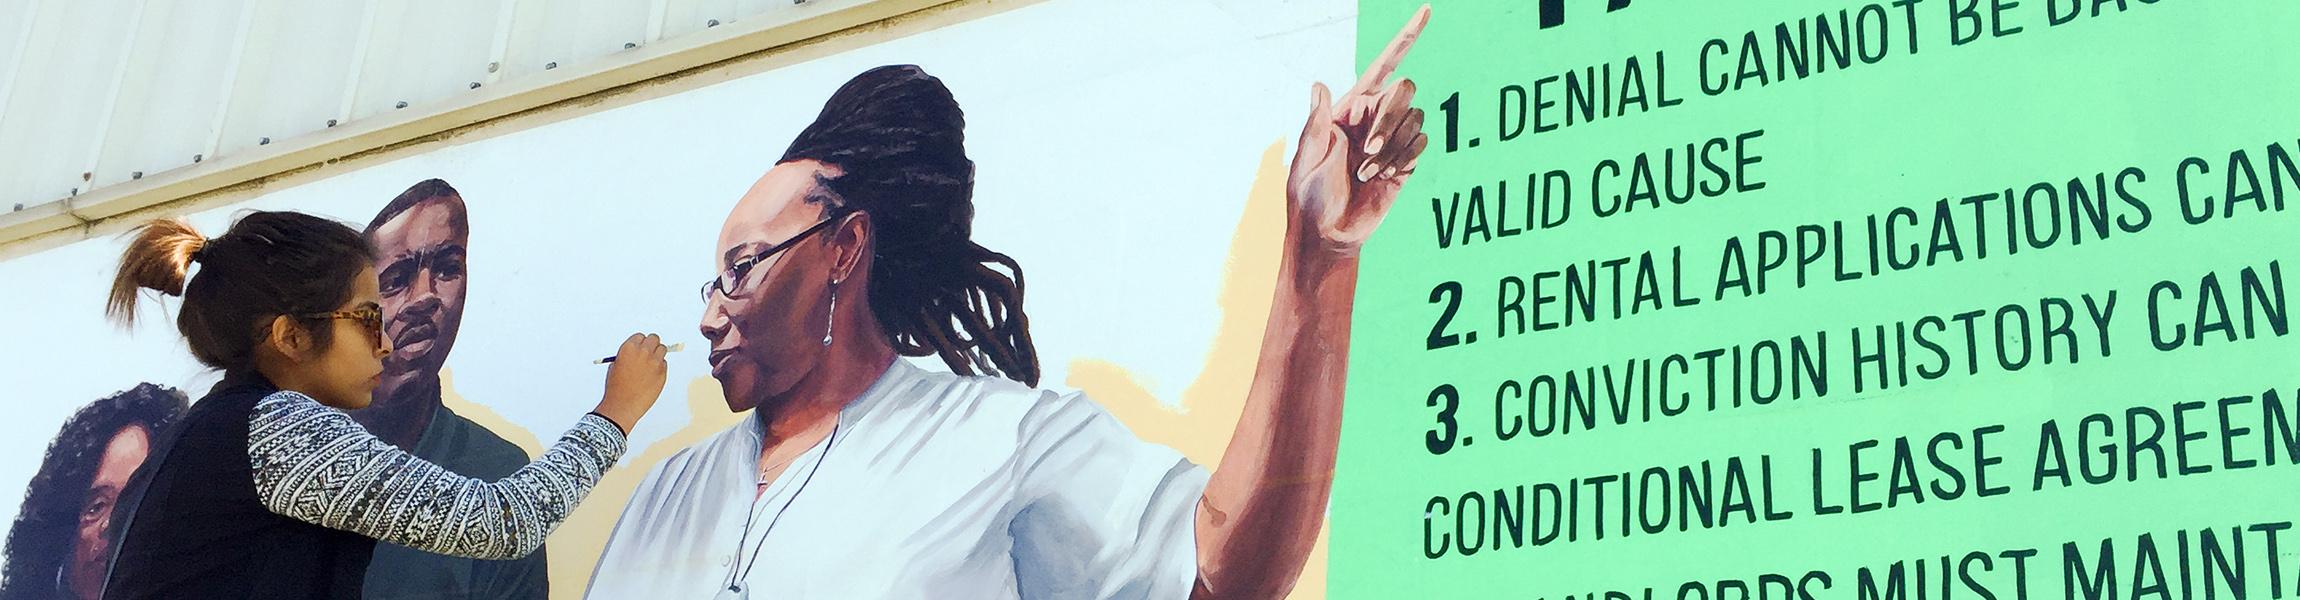 A young woman of color paints a mural. The visible portion of the mural is of a Black woman point to a list of tenants' rights shown in black paint on bright green background.